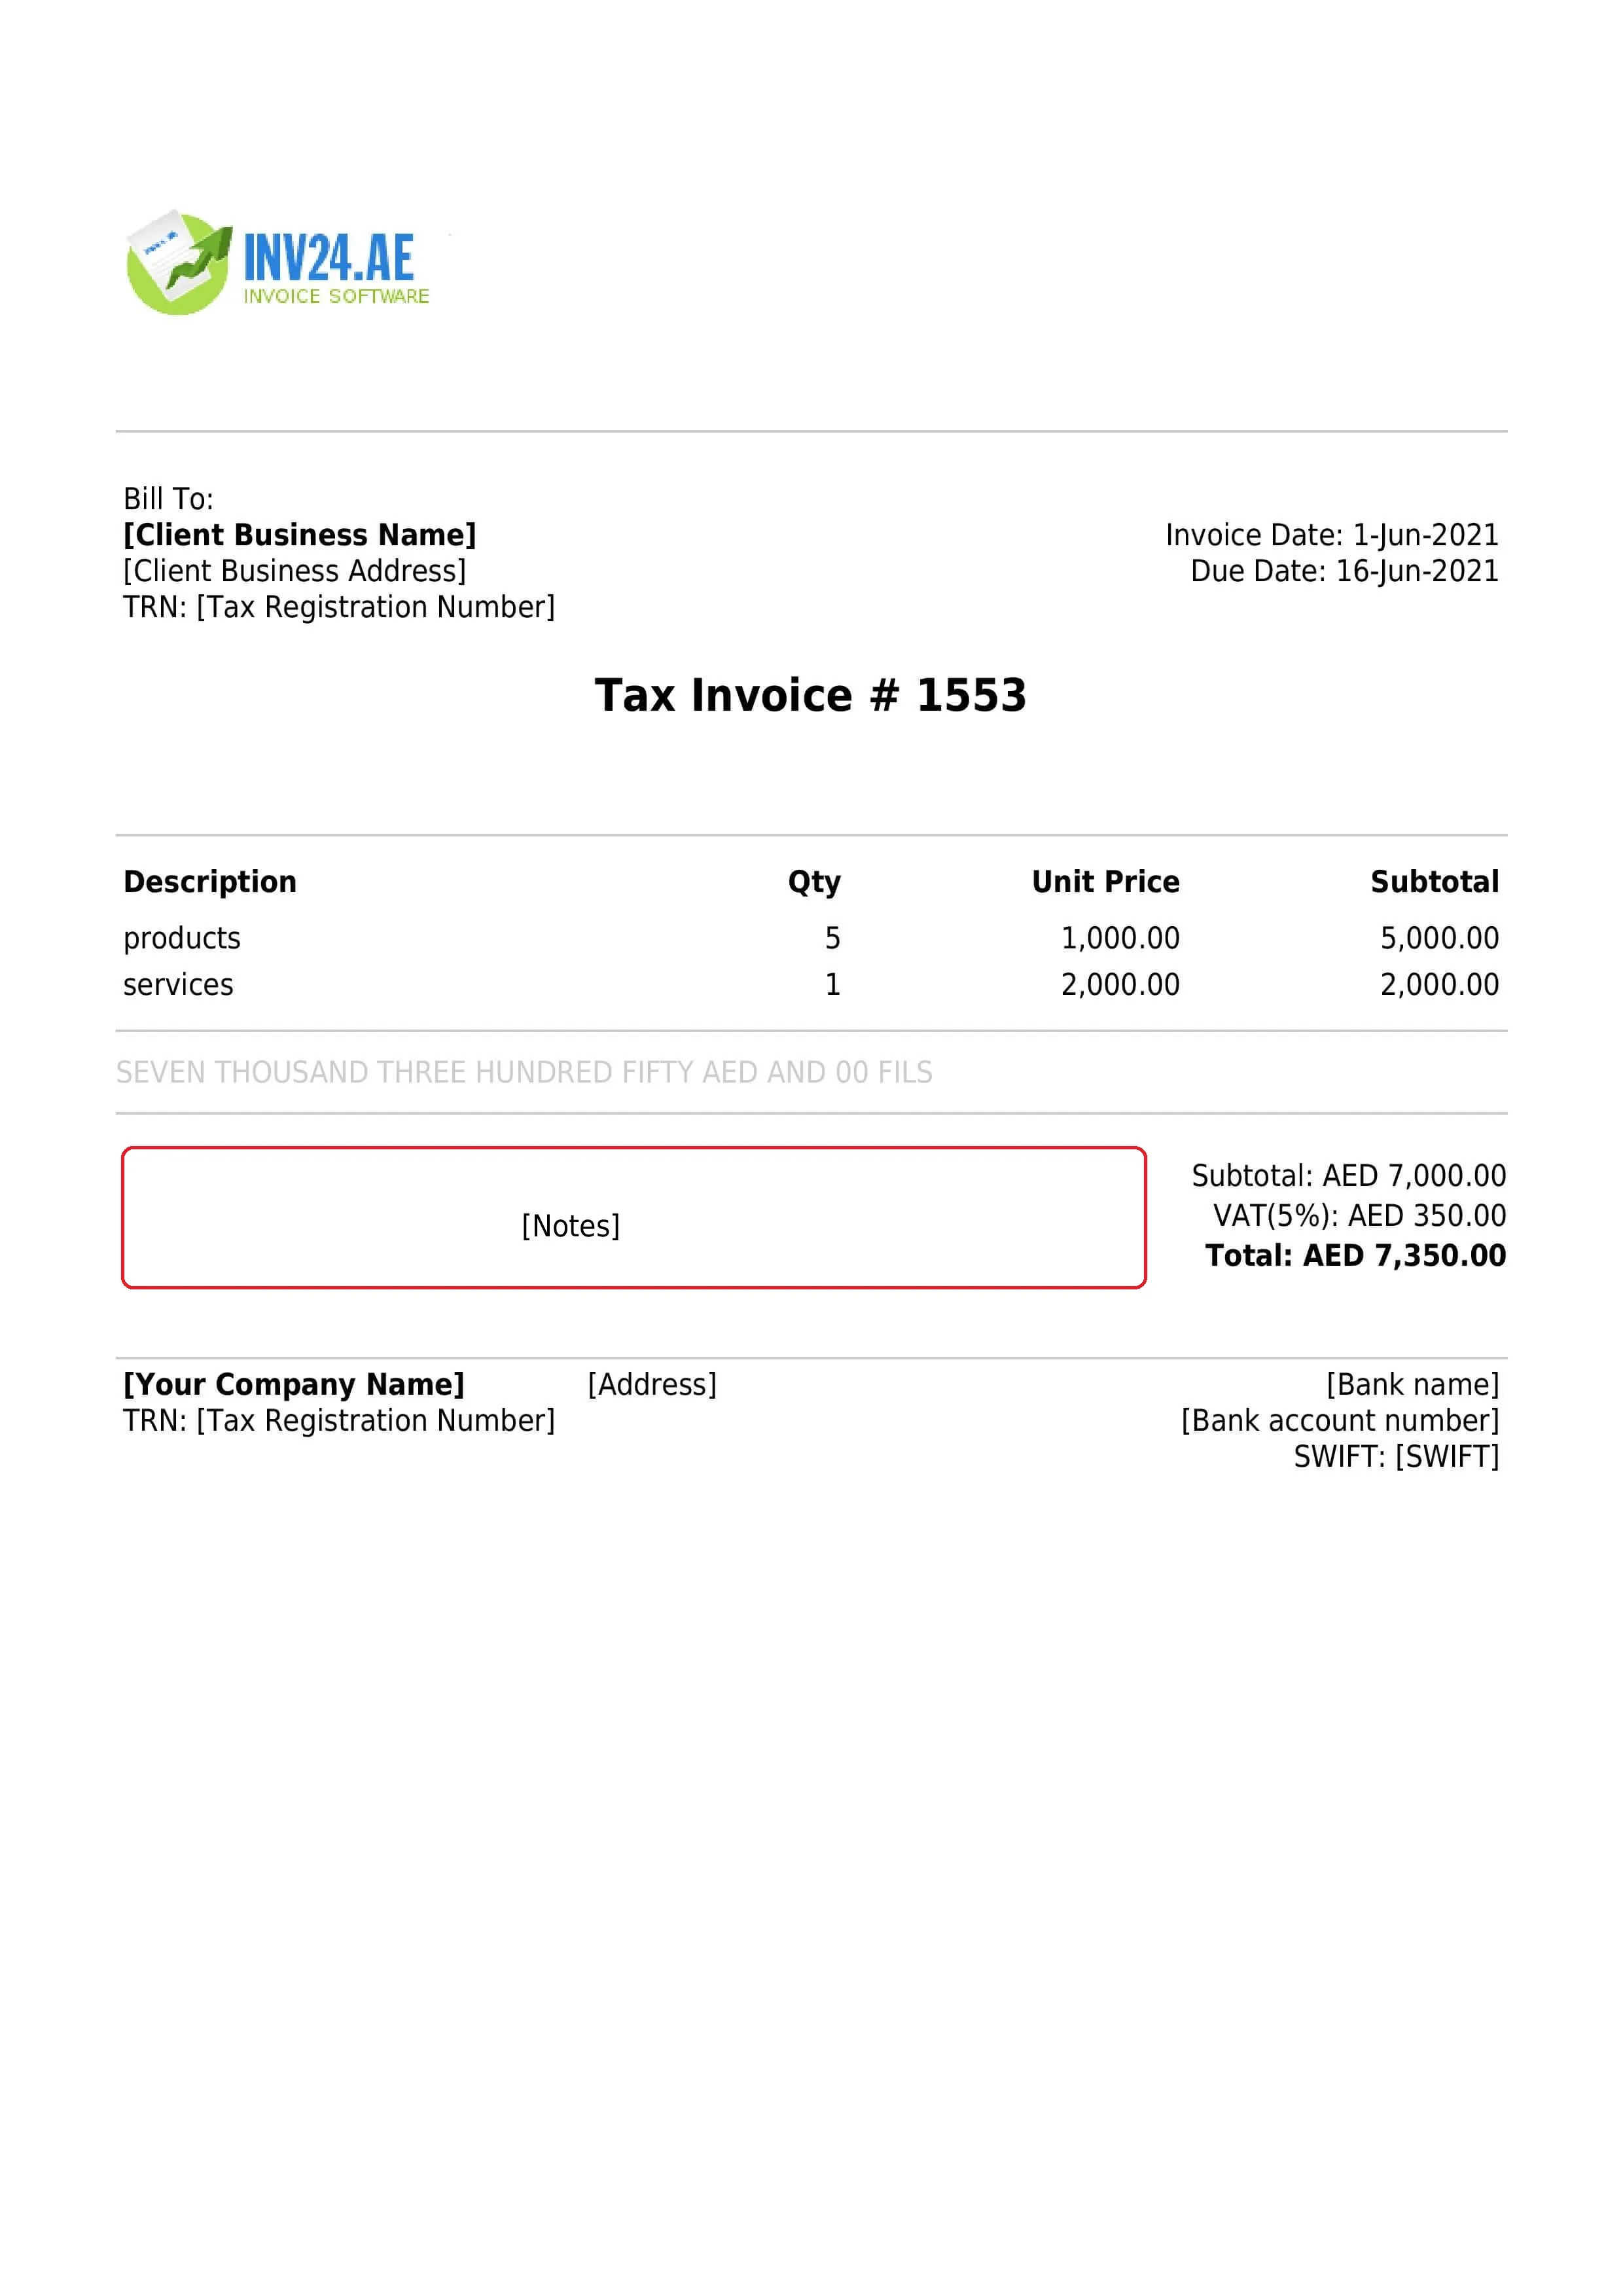 Invoice notes